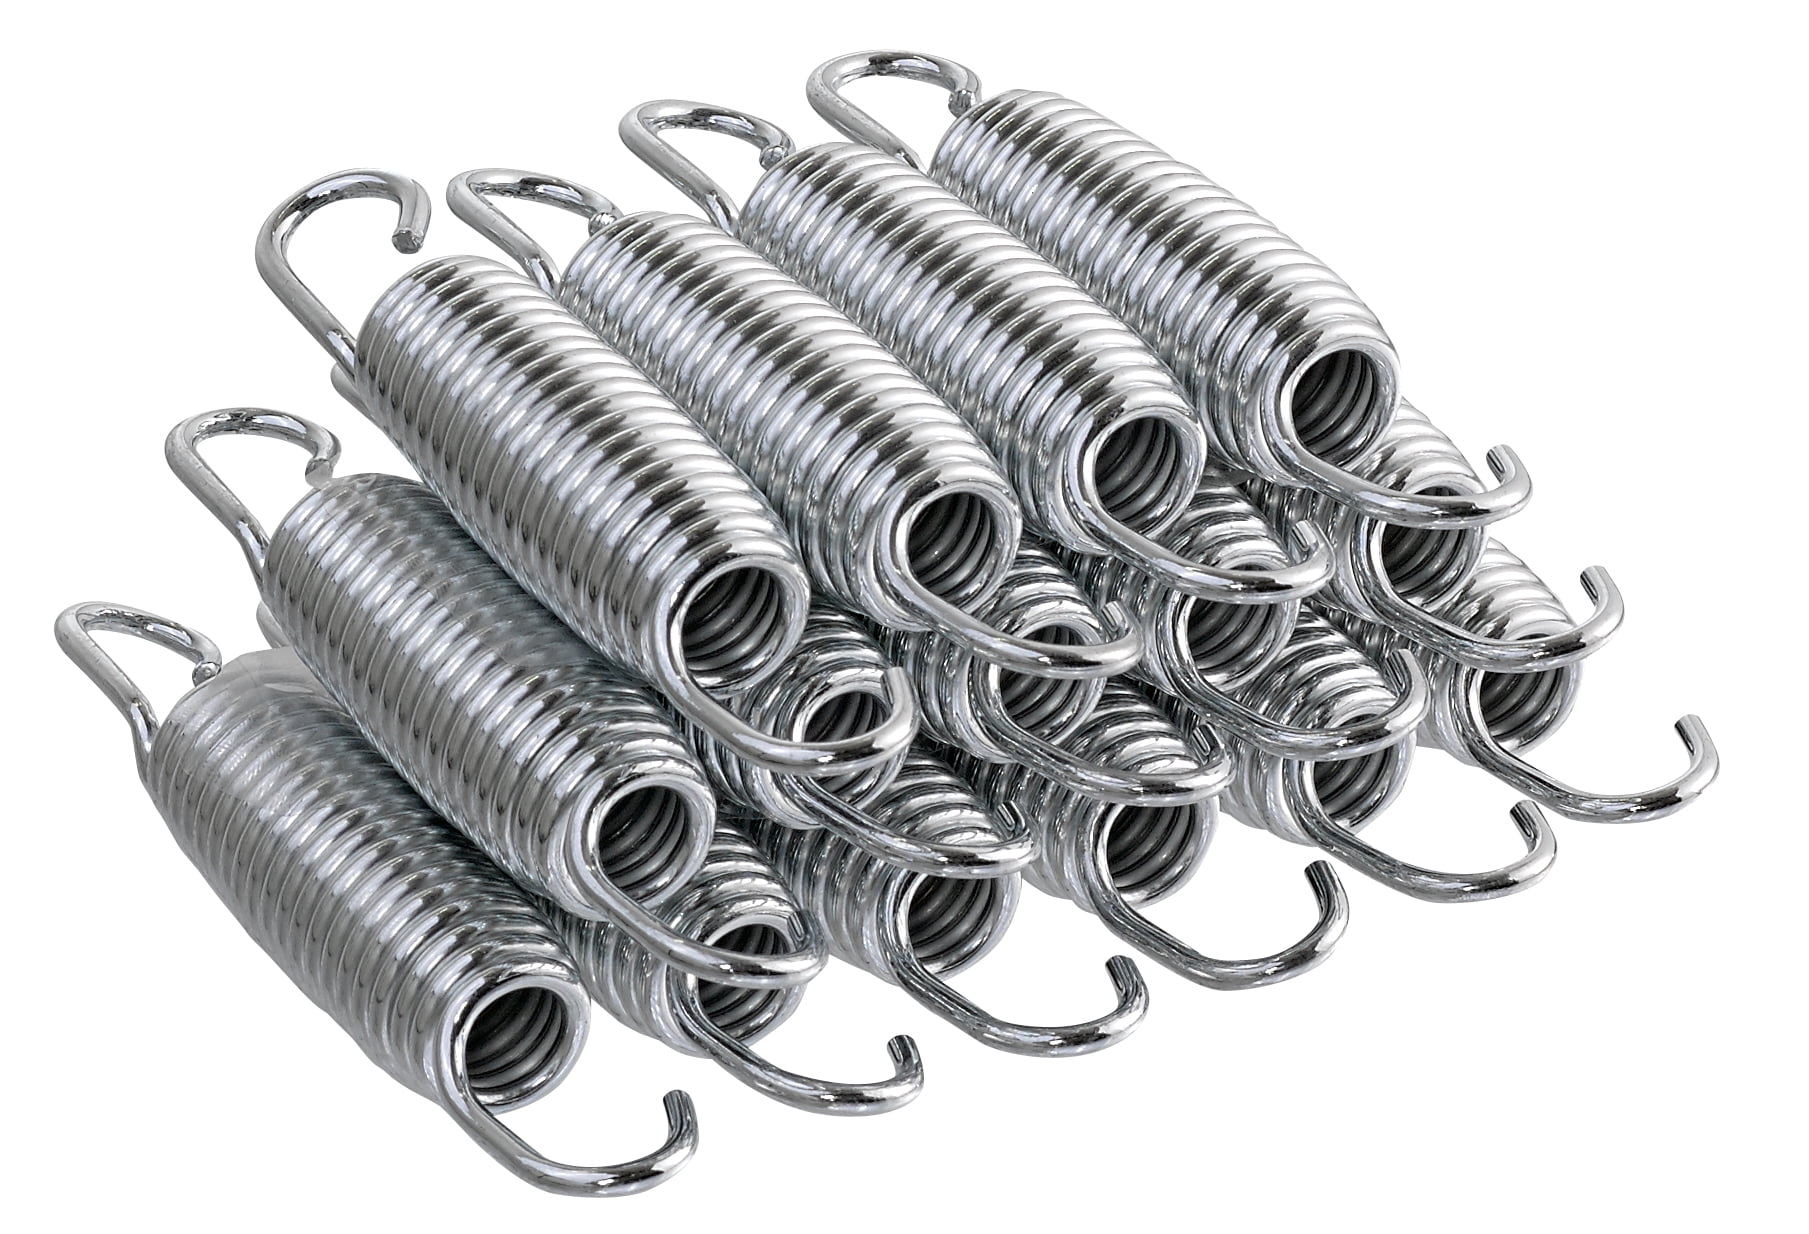 Heavy-Duty Galvanized Steel Replacement Spring with T-Hook Weather Resistant Durable Commercial Size Springs 20 Pack Gardenature Trampoline Springs 6.5/5.5 Inch